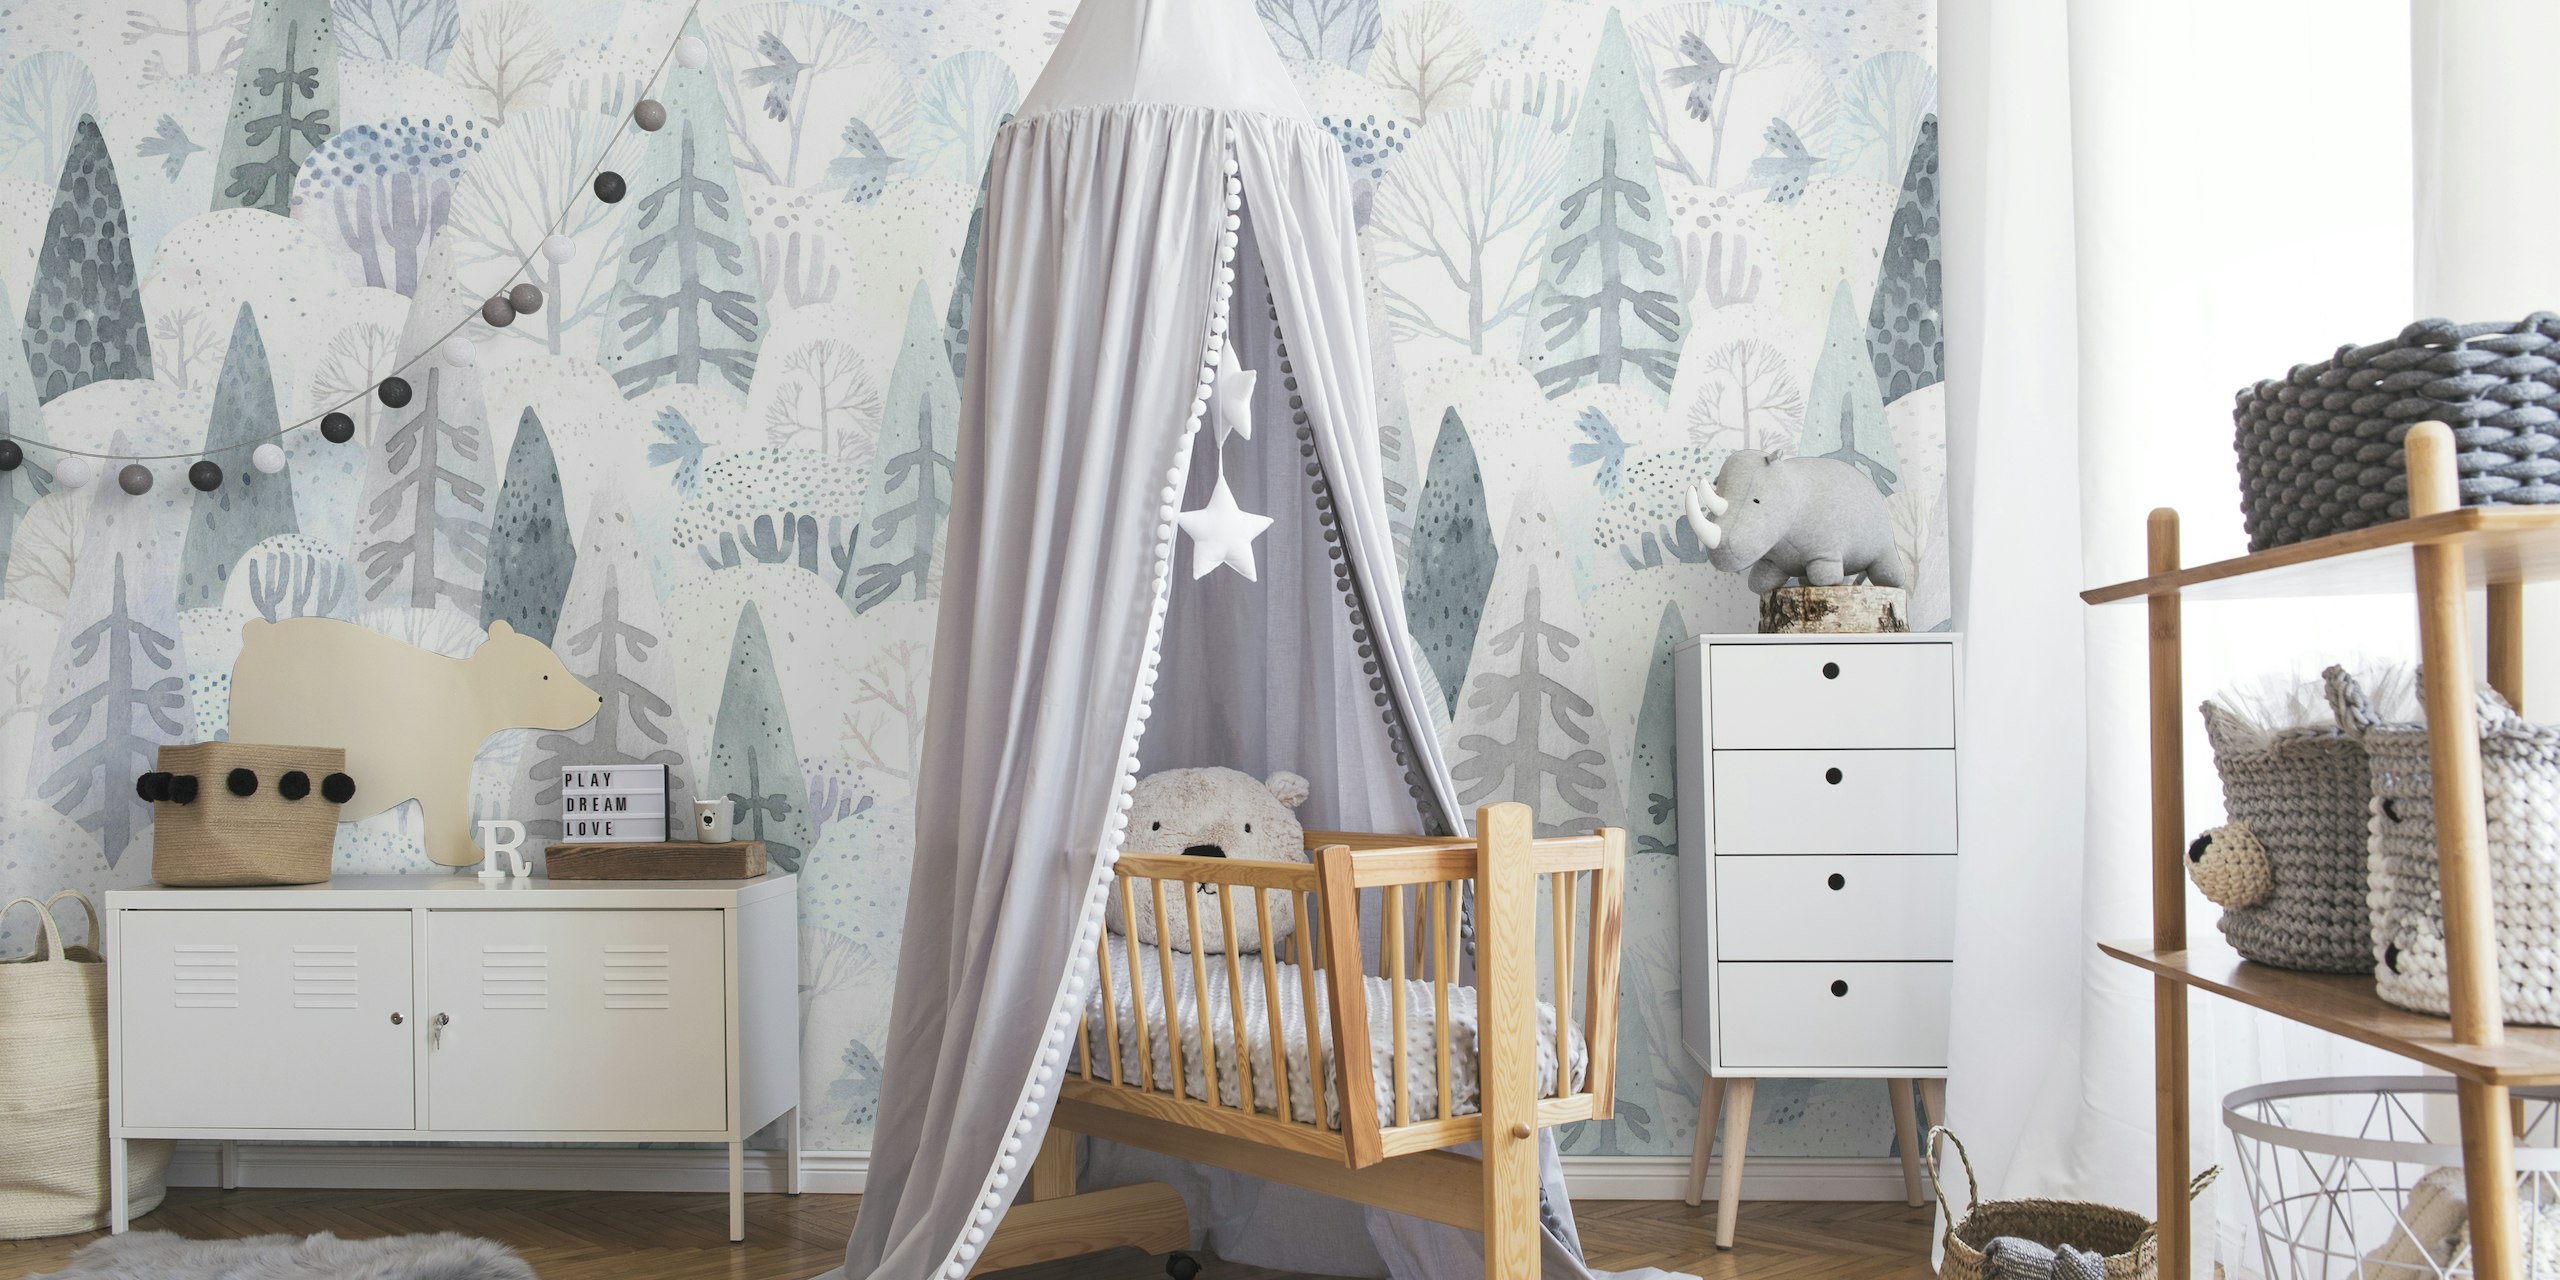 Stylized winter trees and snowflakes wall mural in pastel tones